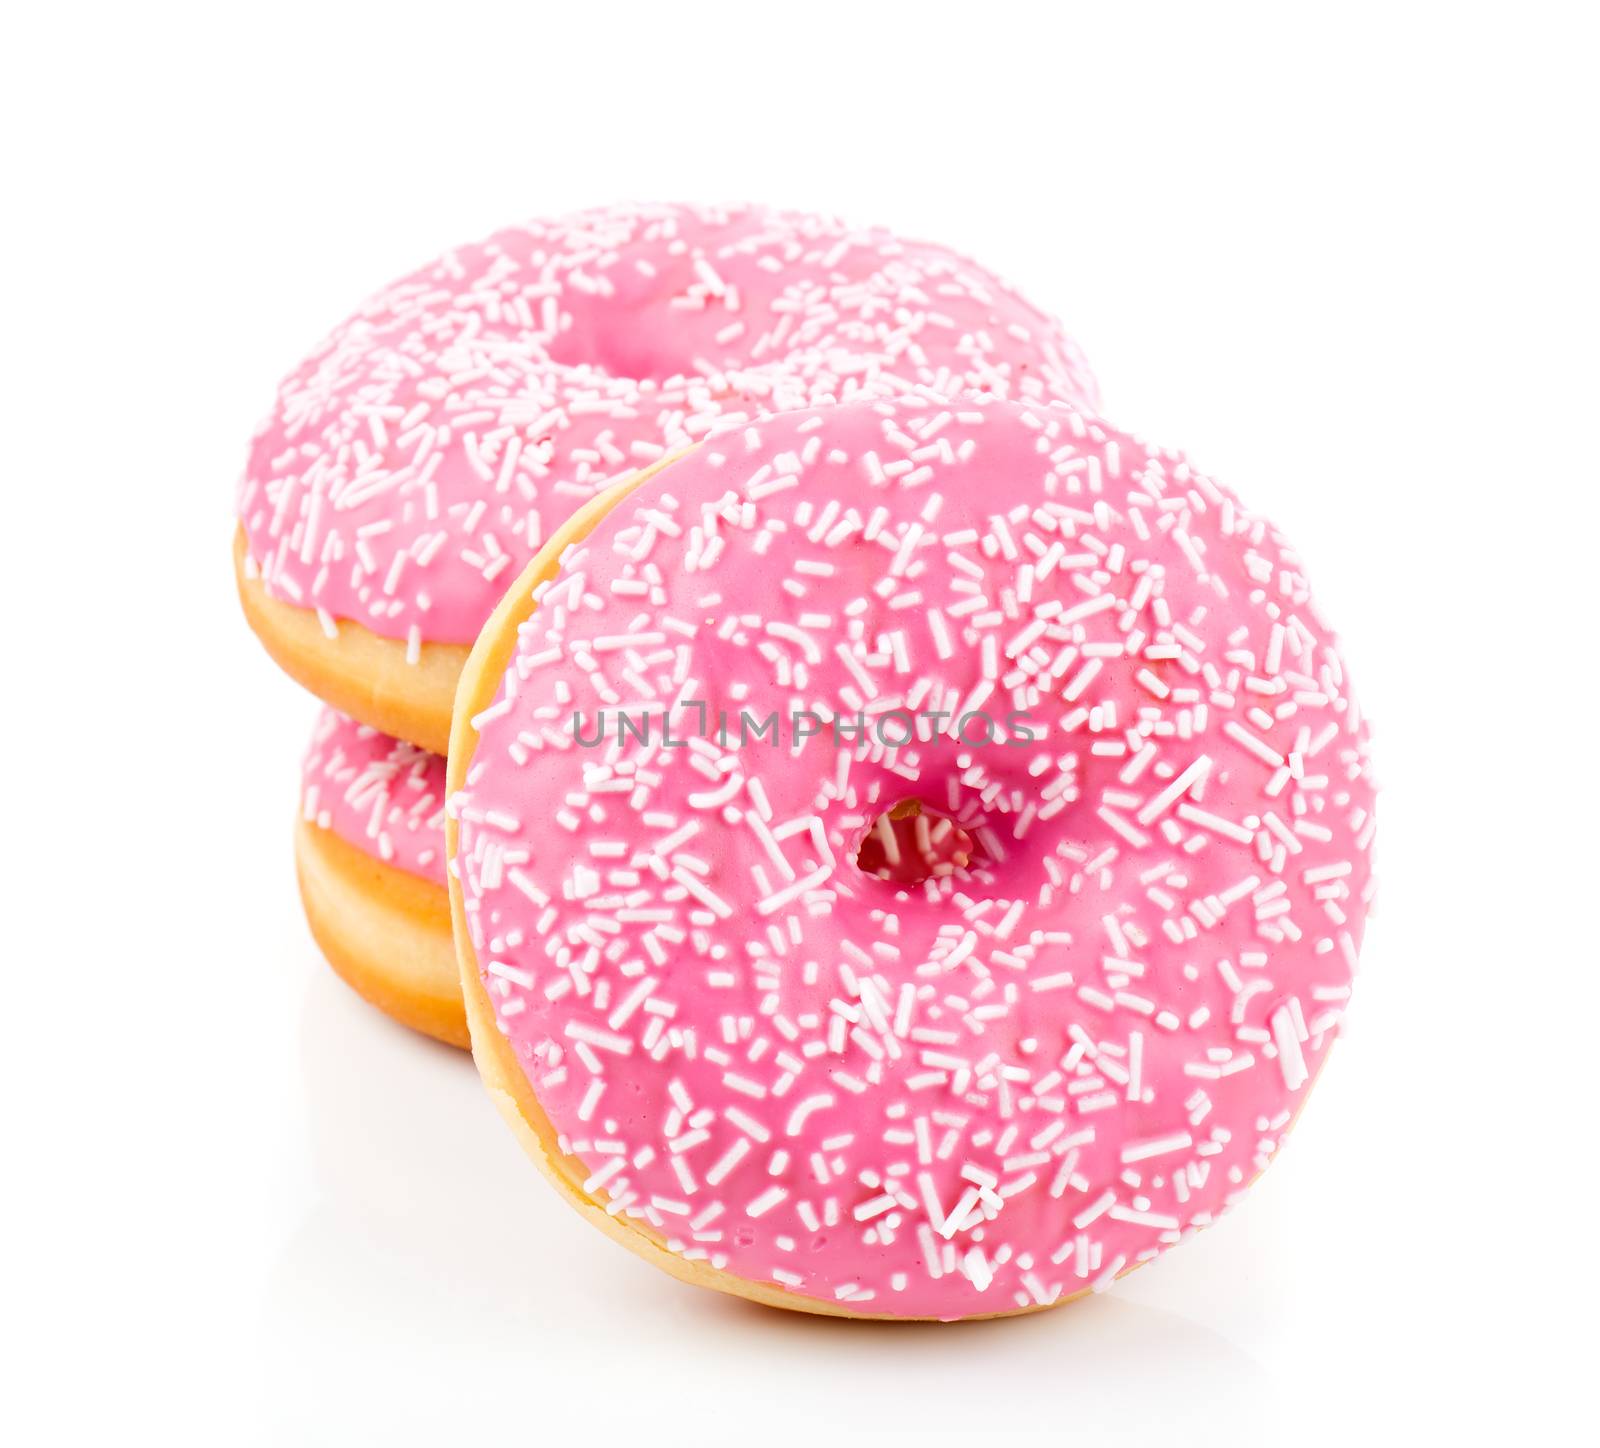 Pink Donut Isolated On White Background by motorolka